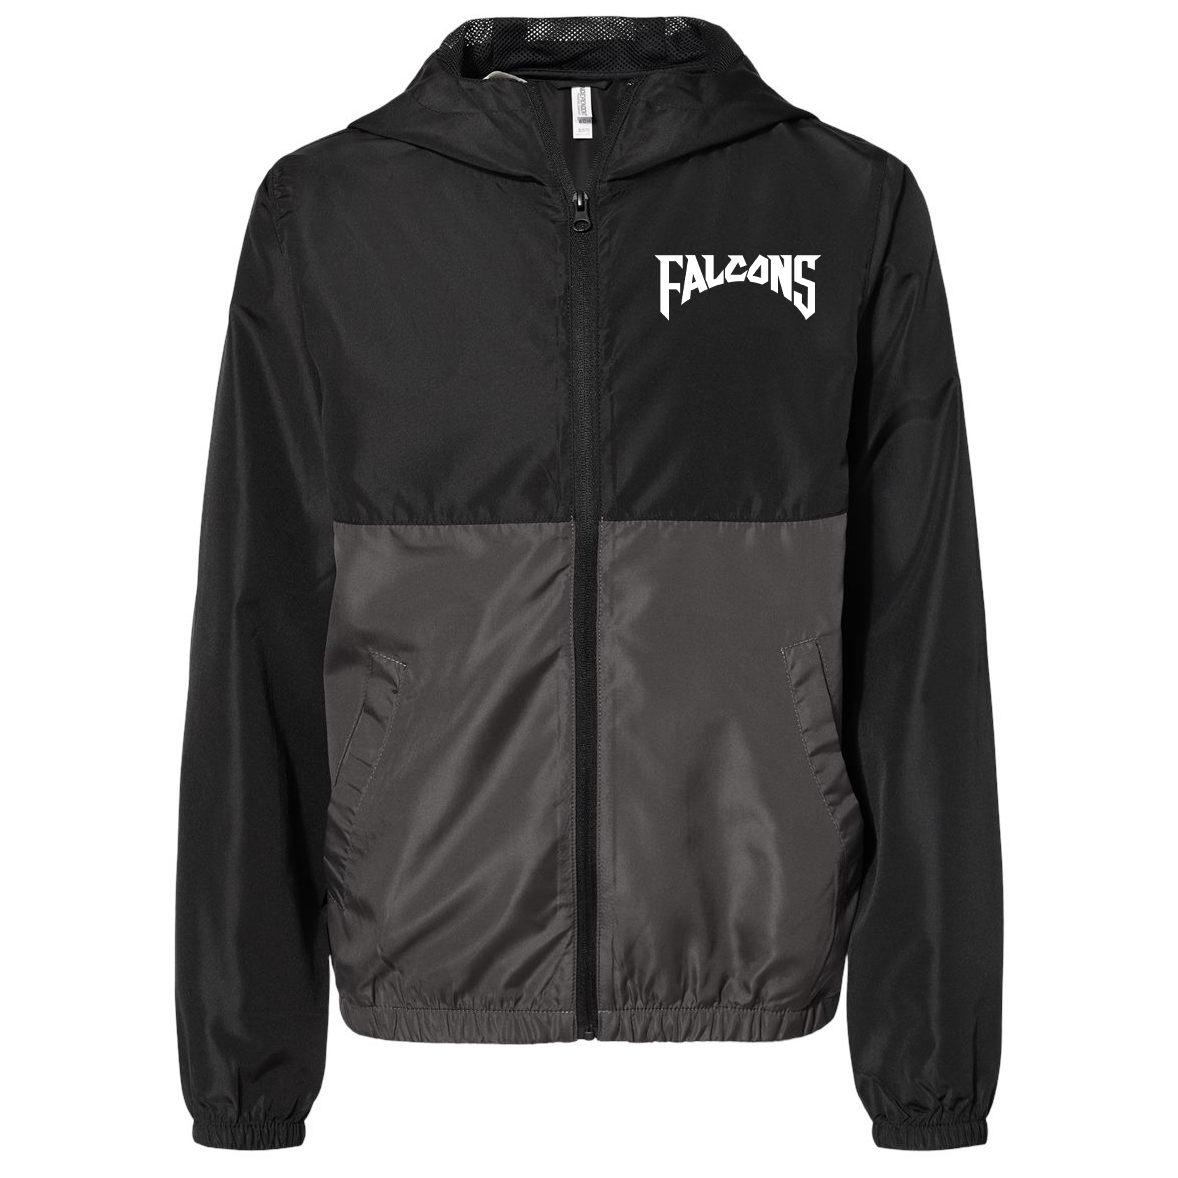 Falcons Ringettes Independent Trading Co. Lightweight Windbreaker Full-Zip Jacket